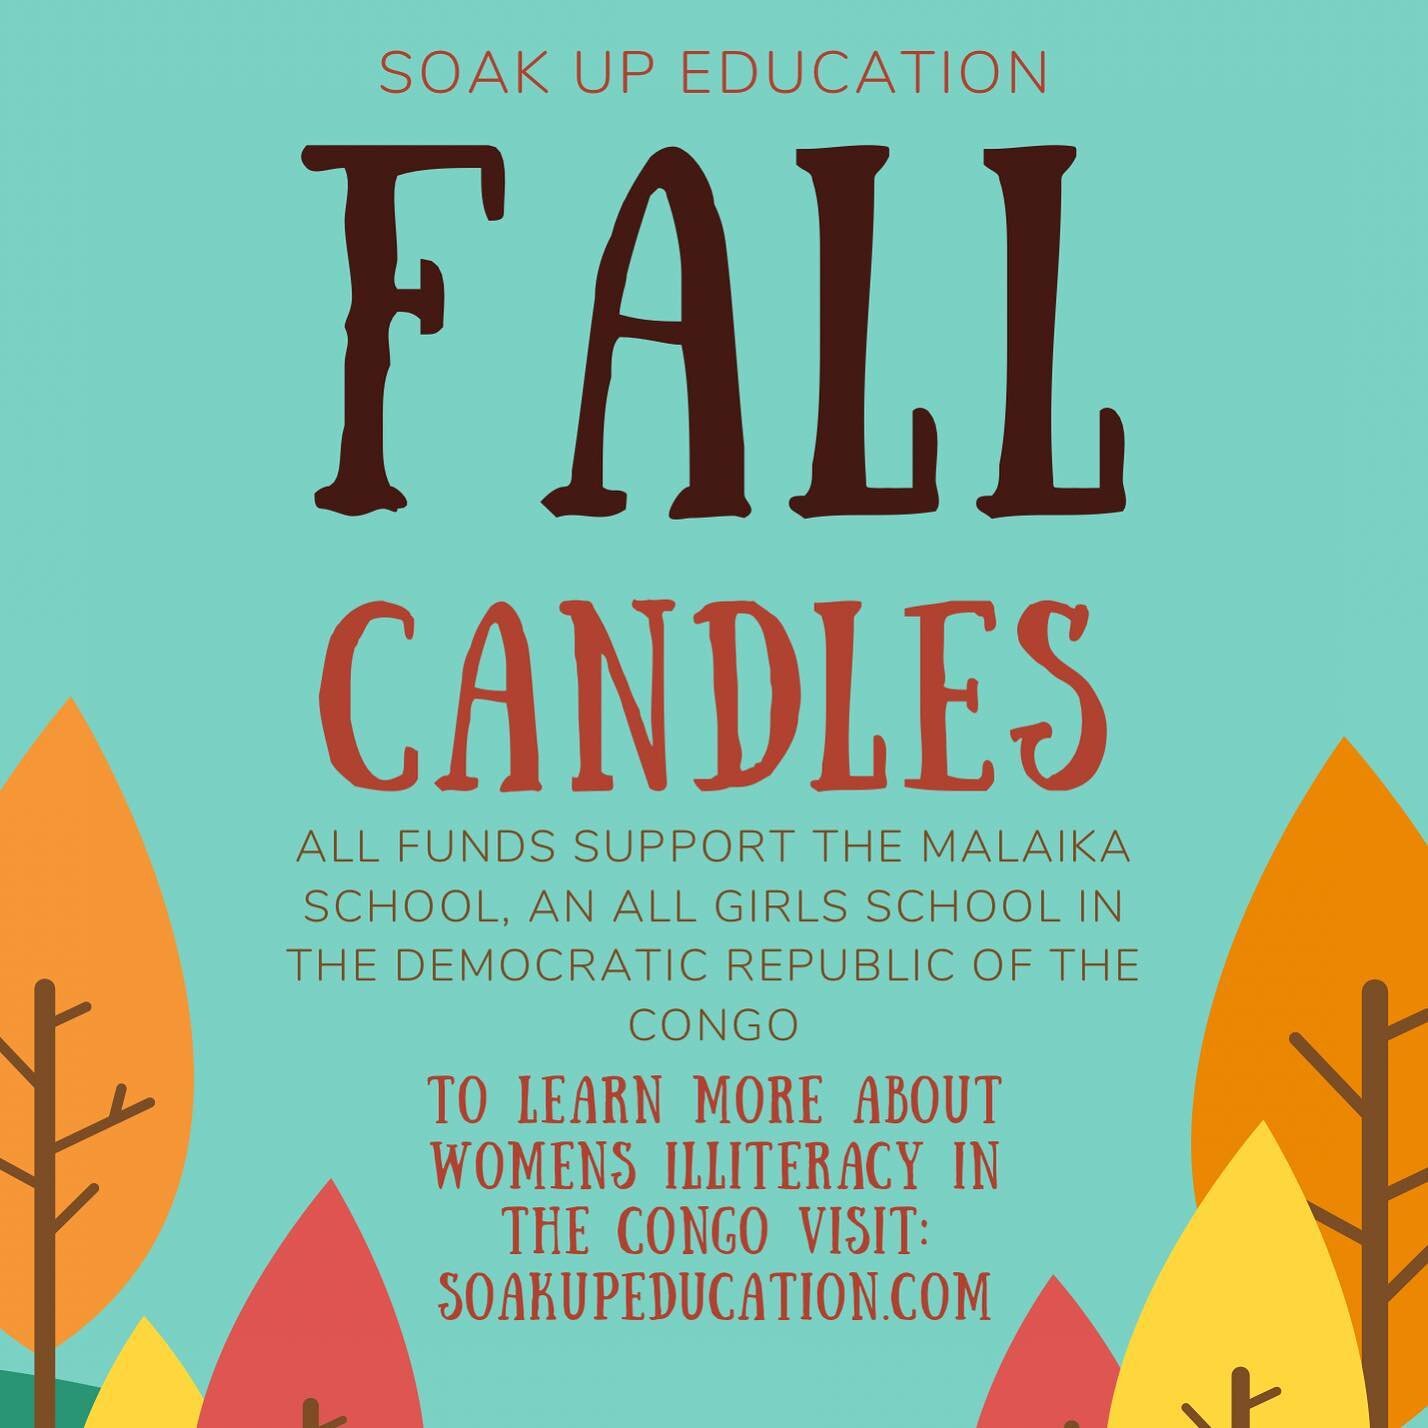 Get excited!!! Fall candles are coming next week! 🍂🎃